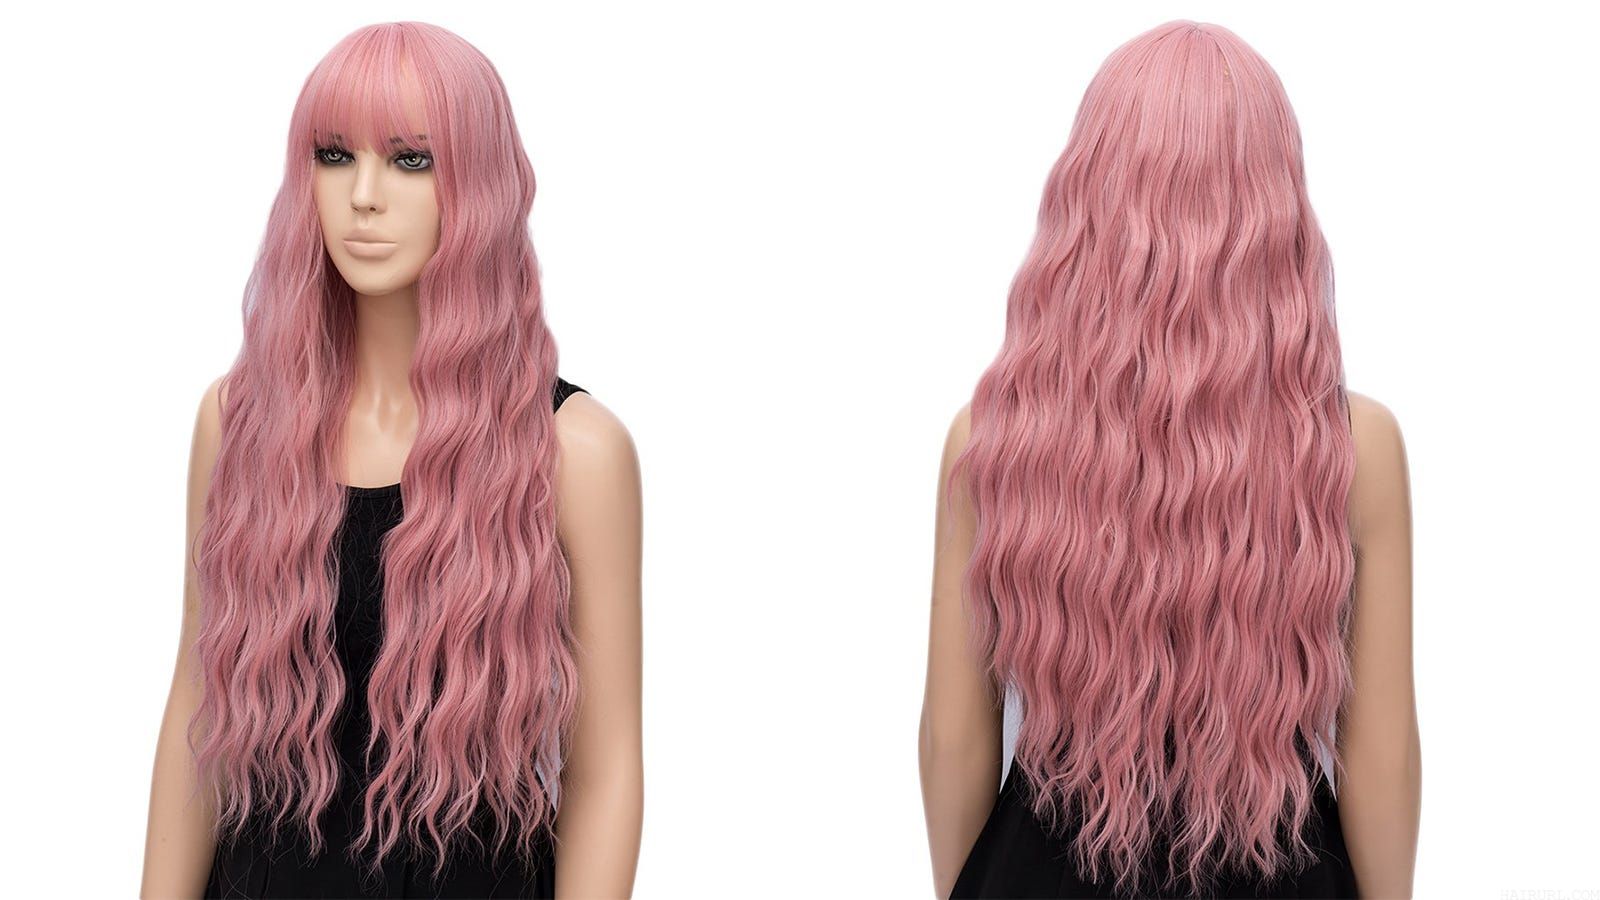 Go for a long, ultra-wavy style with this Netgo wig.